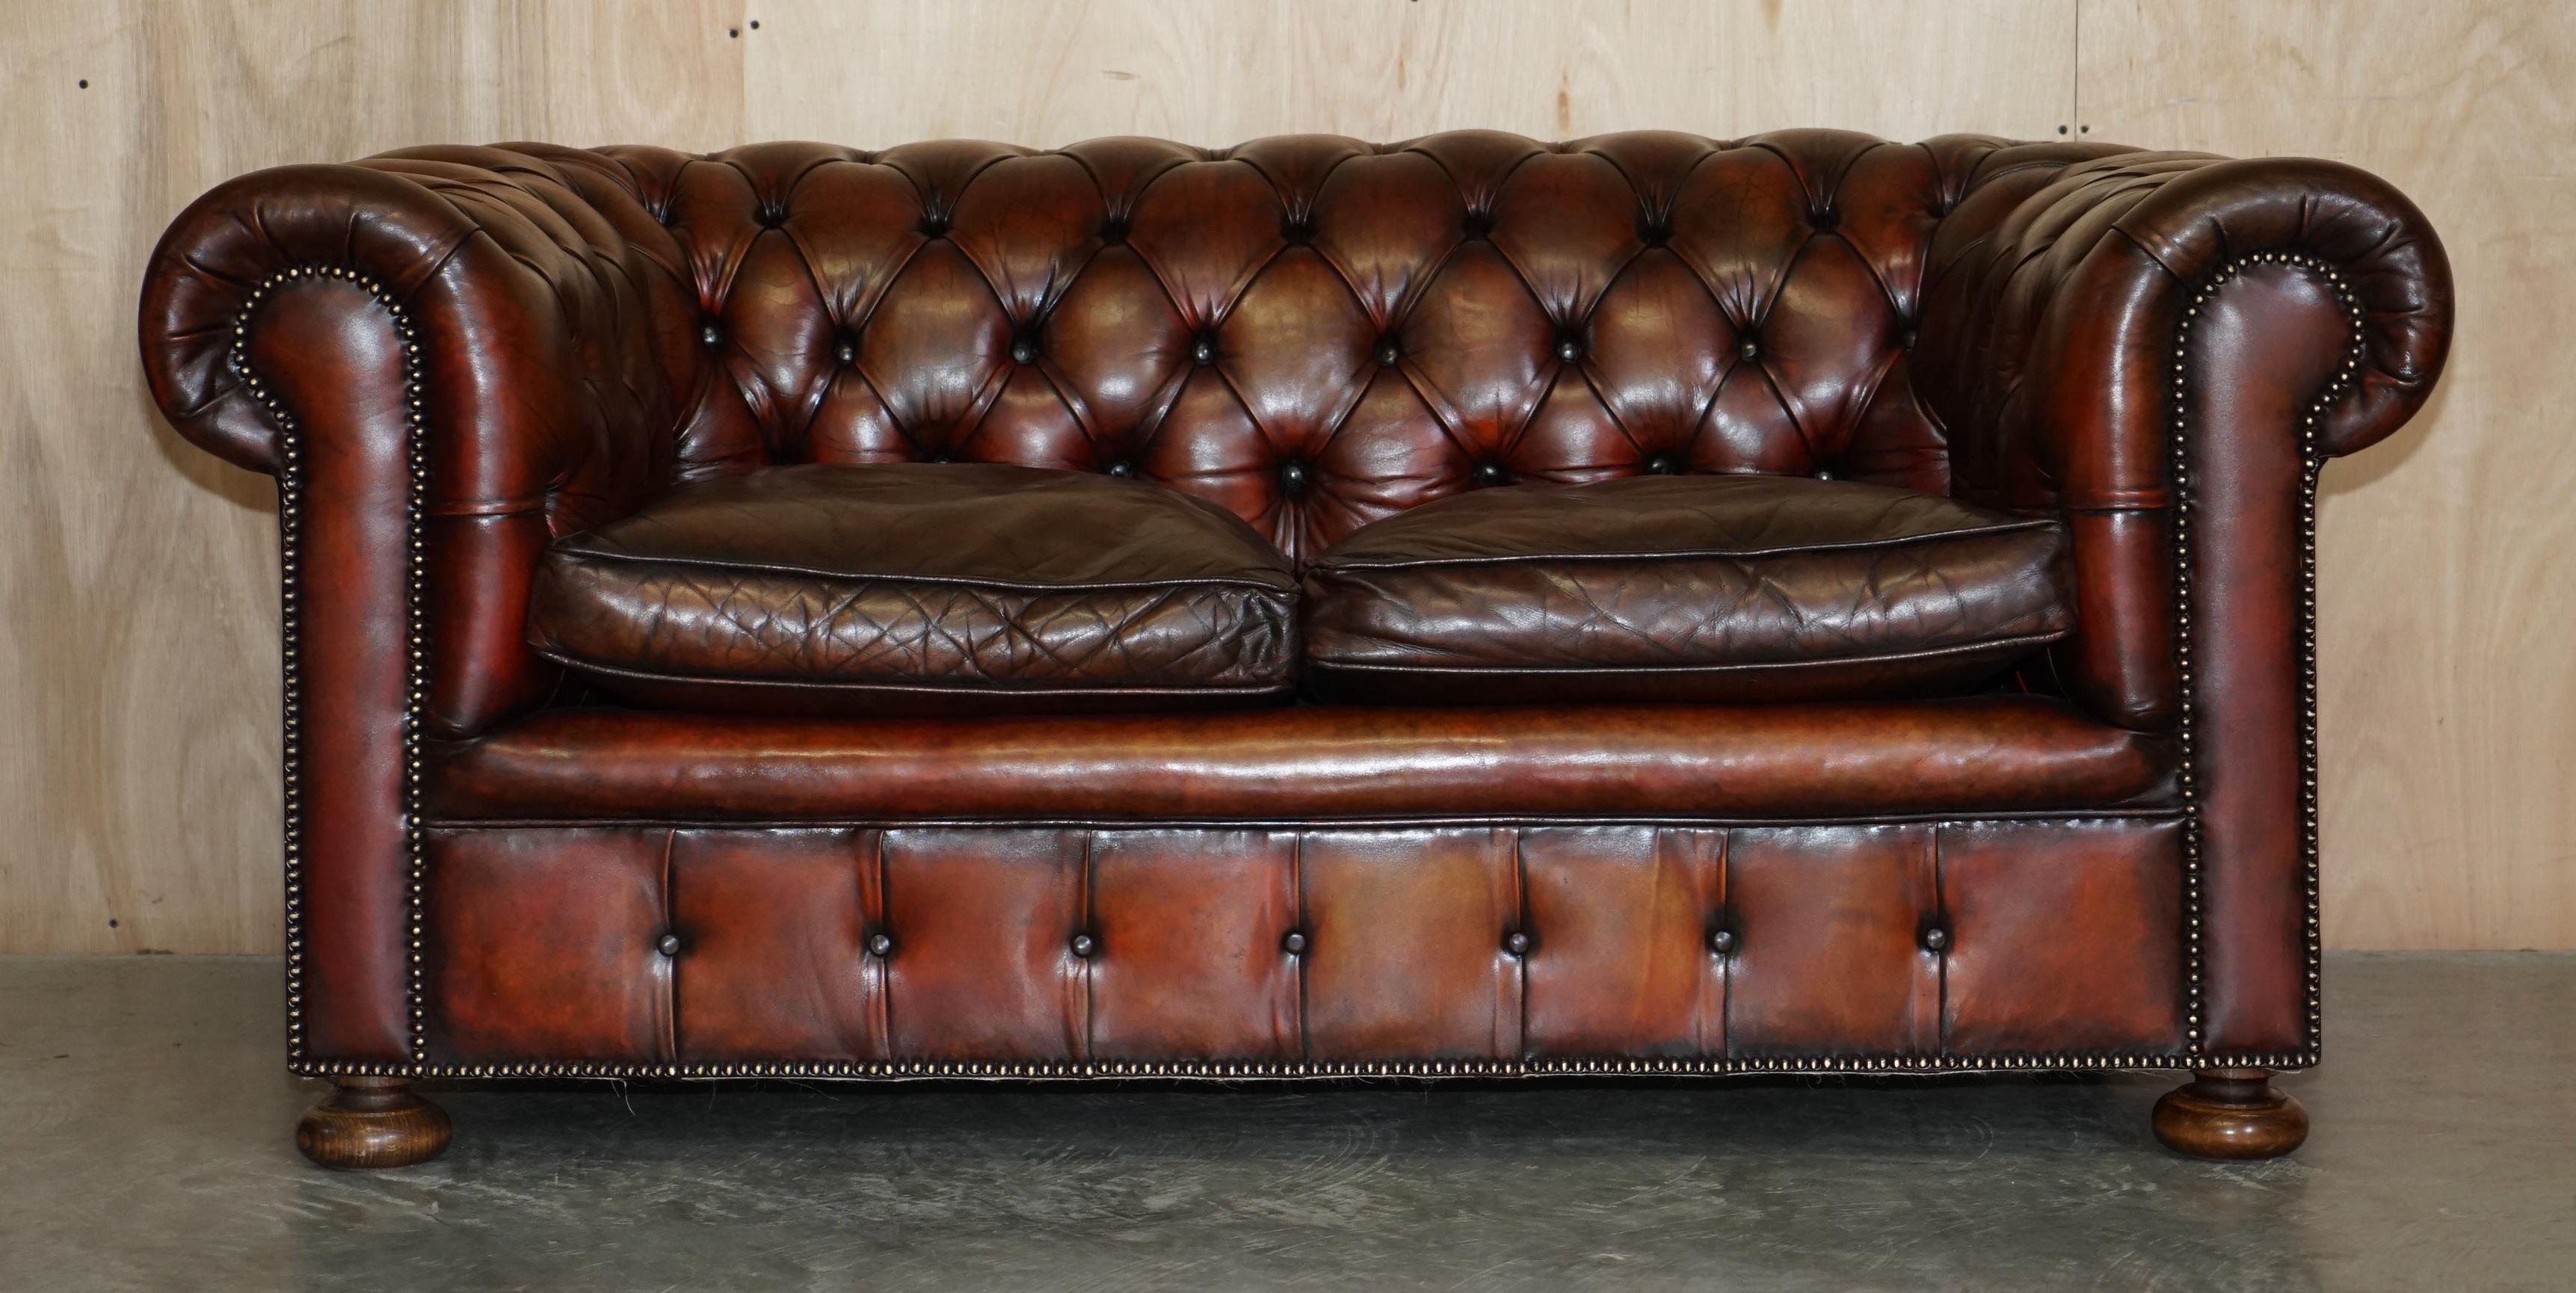 We are delighted to offer for sale this sublime pair of Antique, fully restored, hand dyed Boudreaux brown leather Chesterfield sofas with overstuffed feather filled cushions and solid walnut bun feet

Both sofas have been upholstered in premium